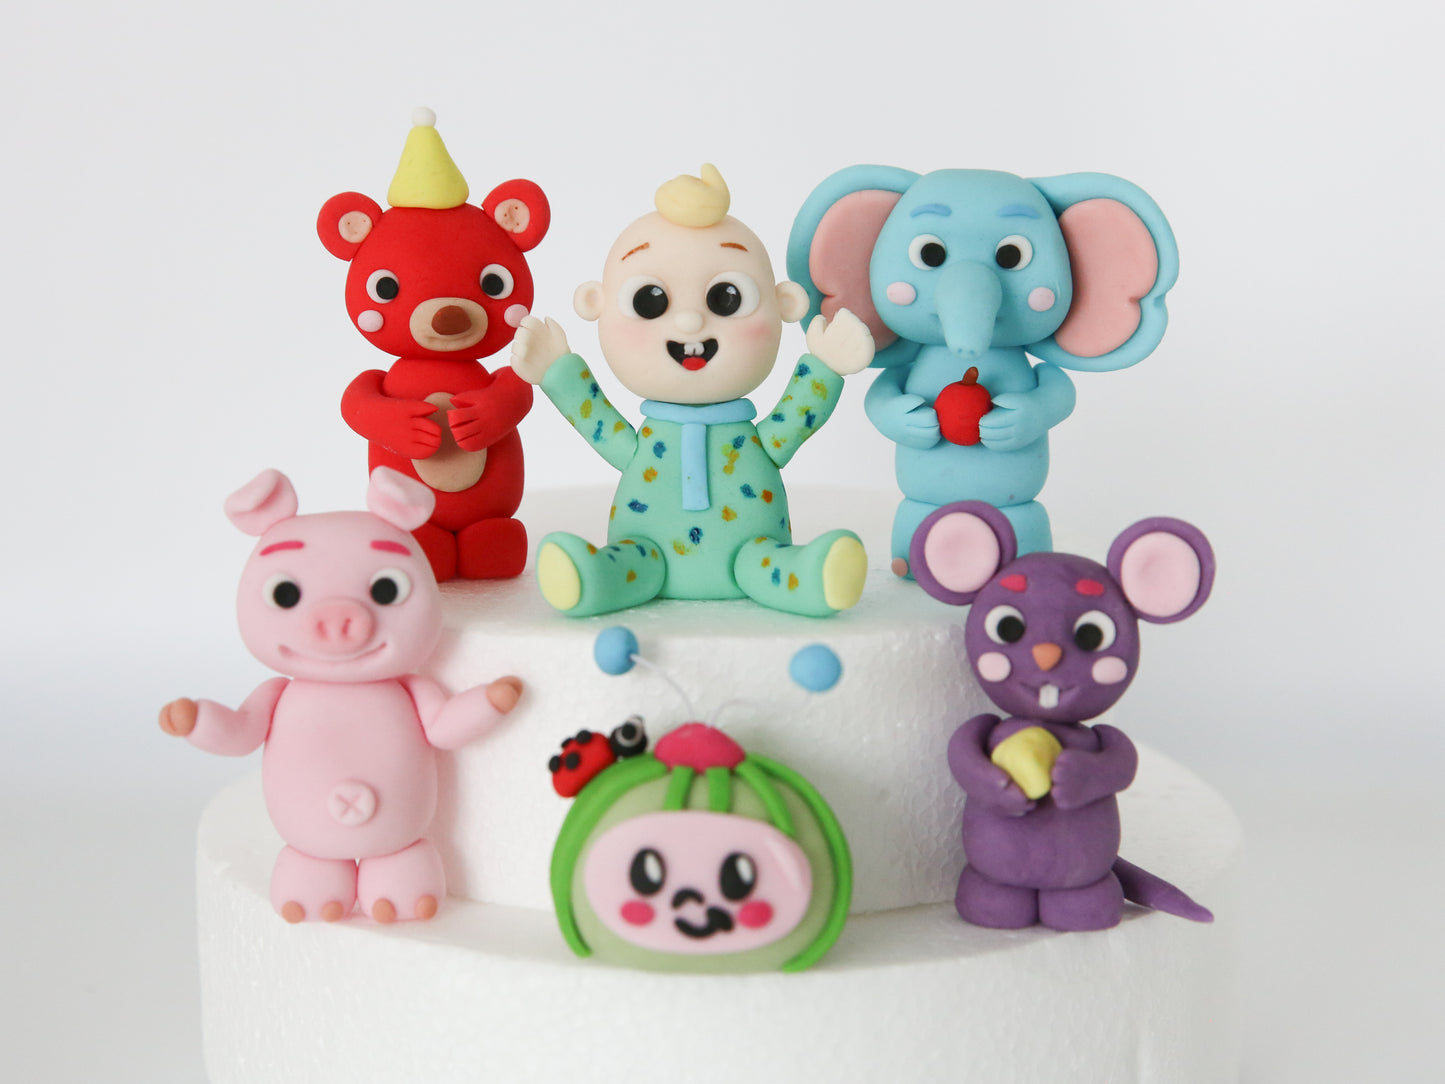 Cartoon Character Melon Inspired Baby and Animal Cake Toppers